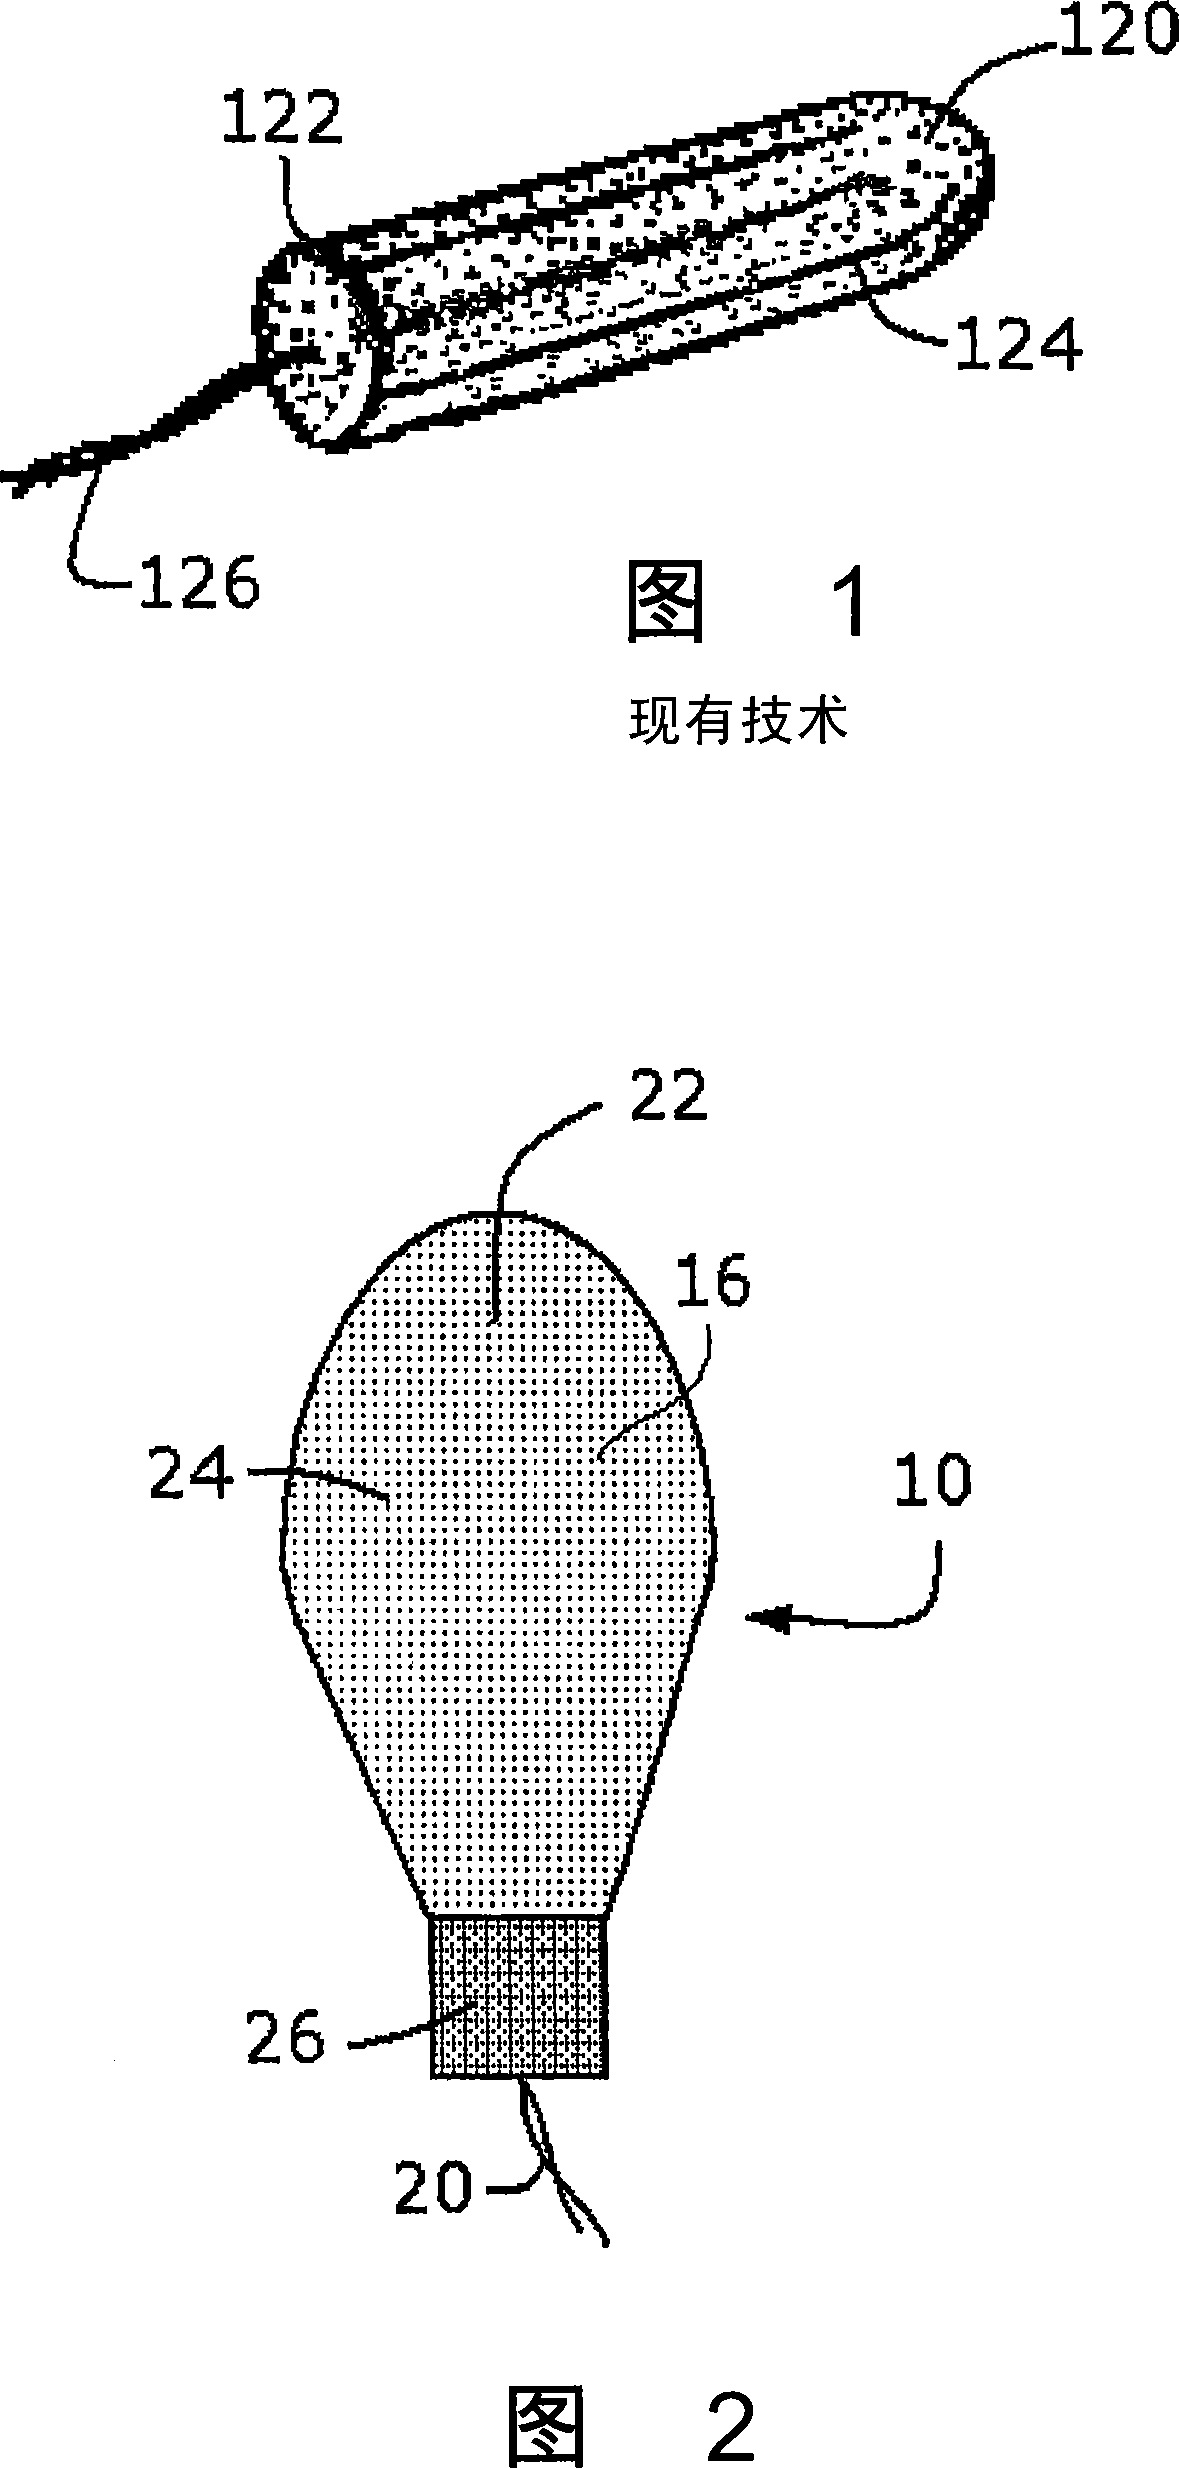 Intravaginal device with controlled expansion